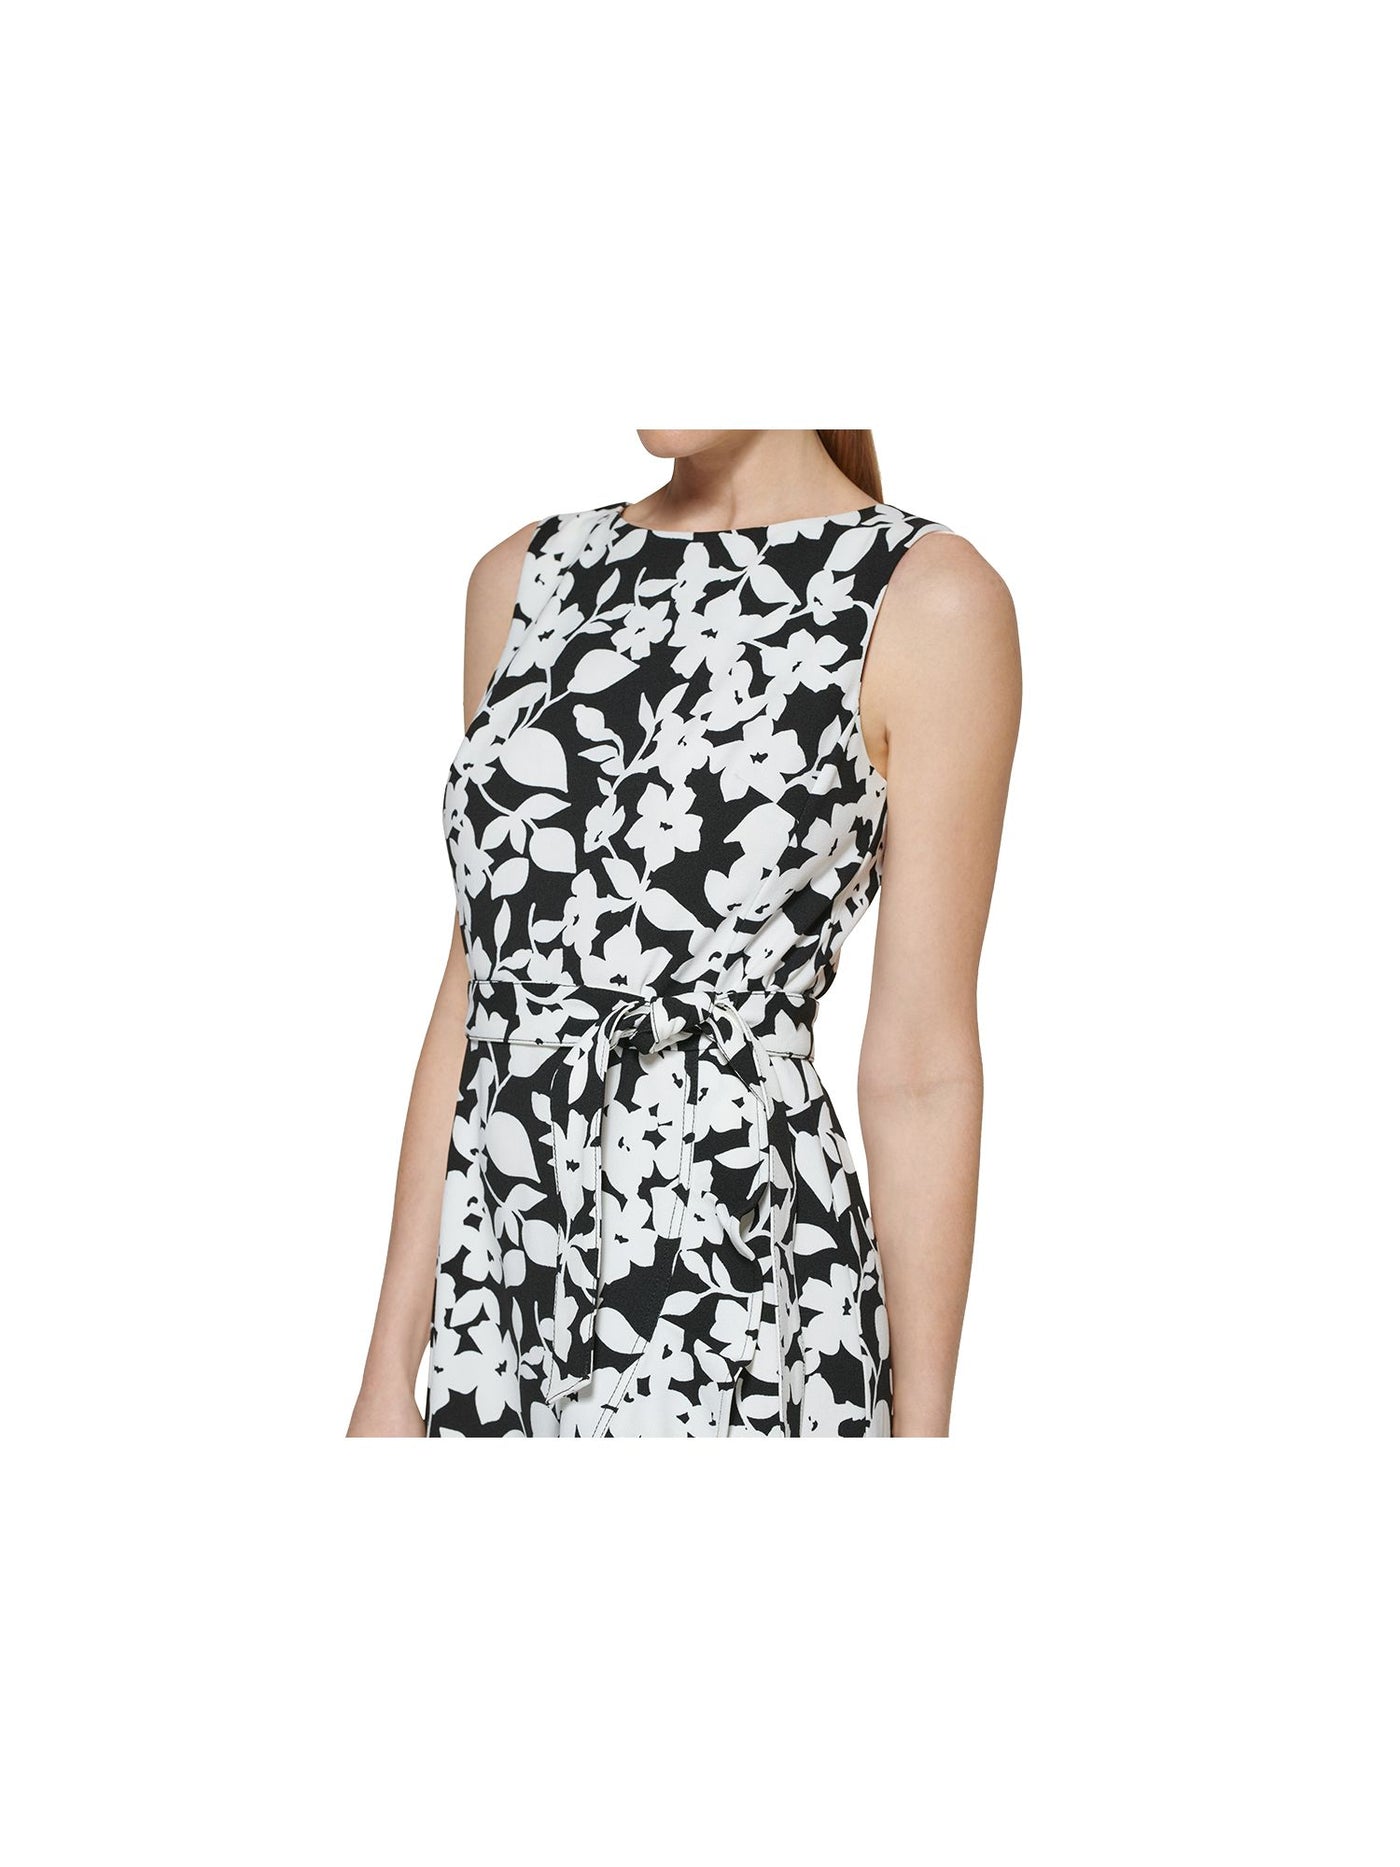 CALVIN KLEIN Womens Black Zippered Textured Tie Darted Cascade Ruffle Unline Floral Sleeveless Boat Neck Knee Length Fit + Flare Dress Petites 4P